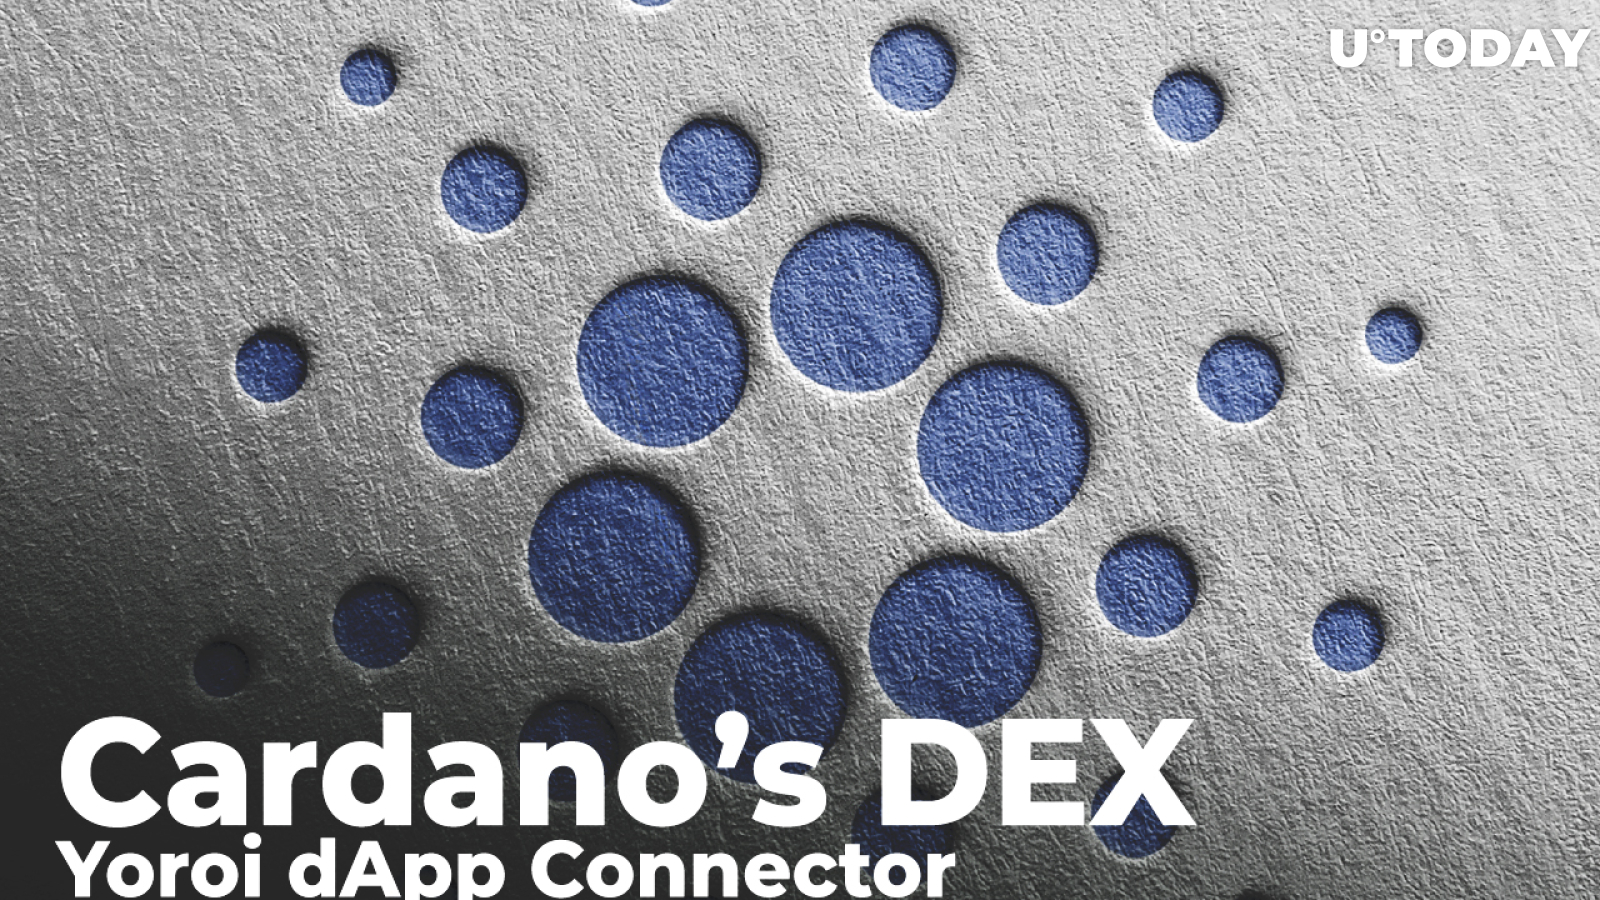 Cardano's DEX Confirms First Transaction with Yoroi dApp Connector. Why Is This Important?